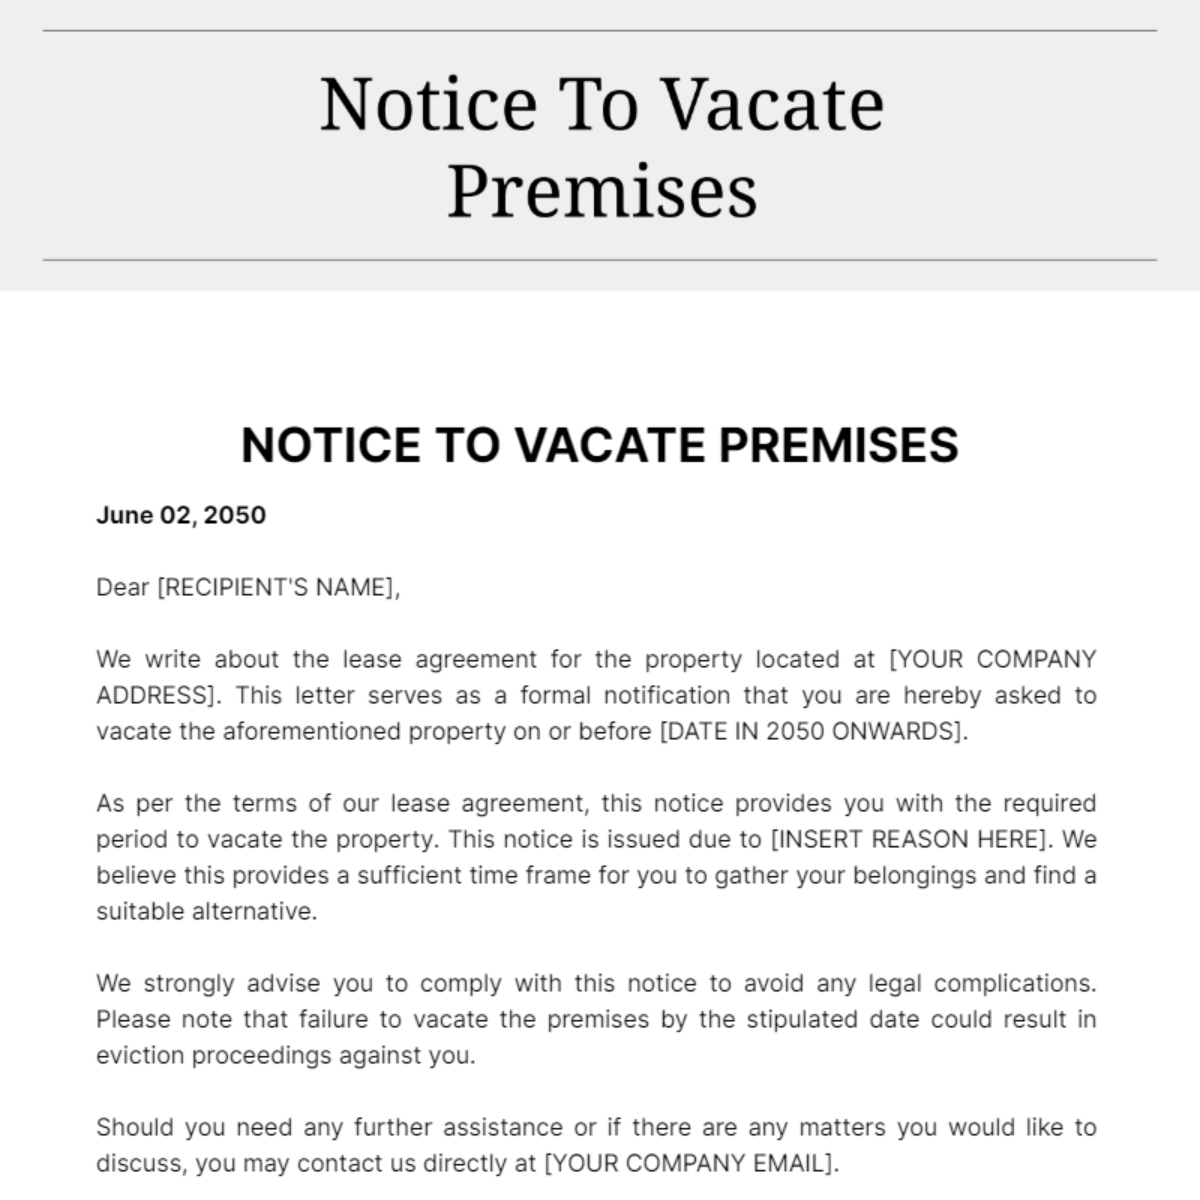 Free Notice To Vacate Premises Template